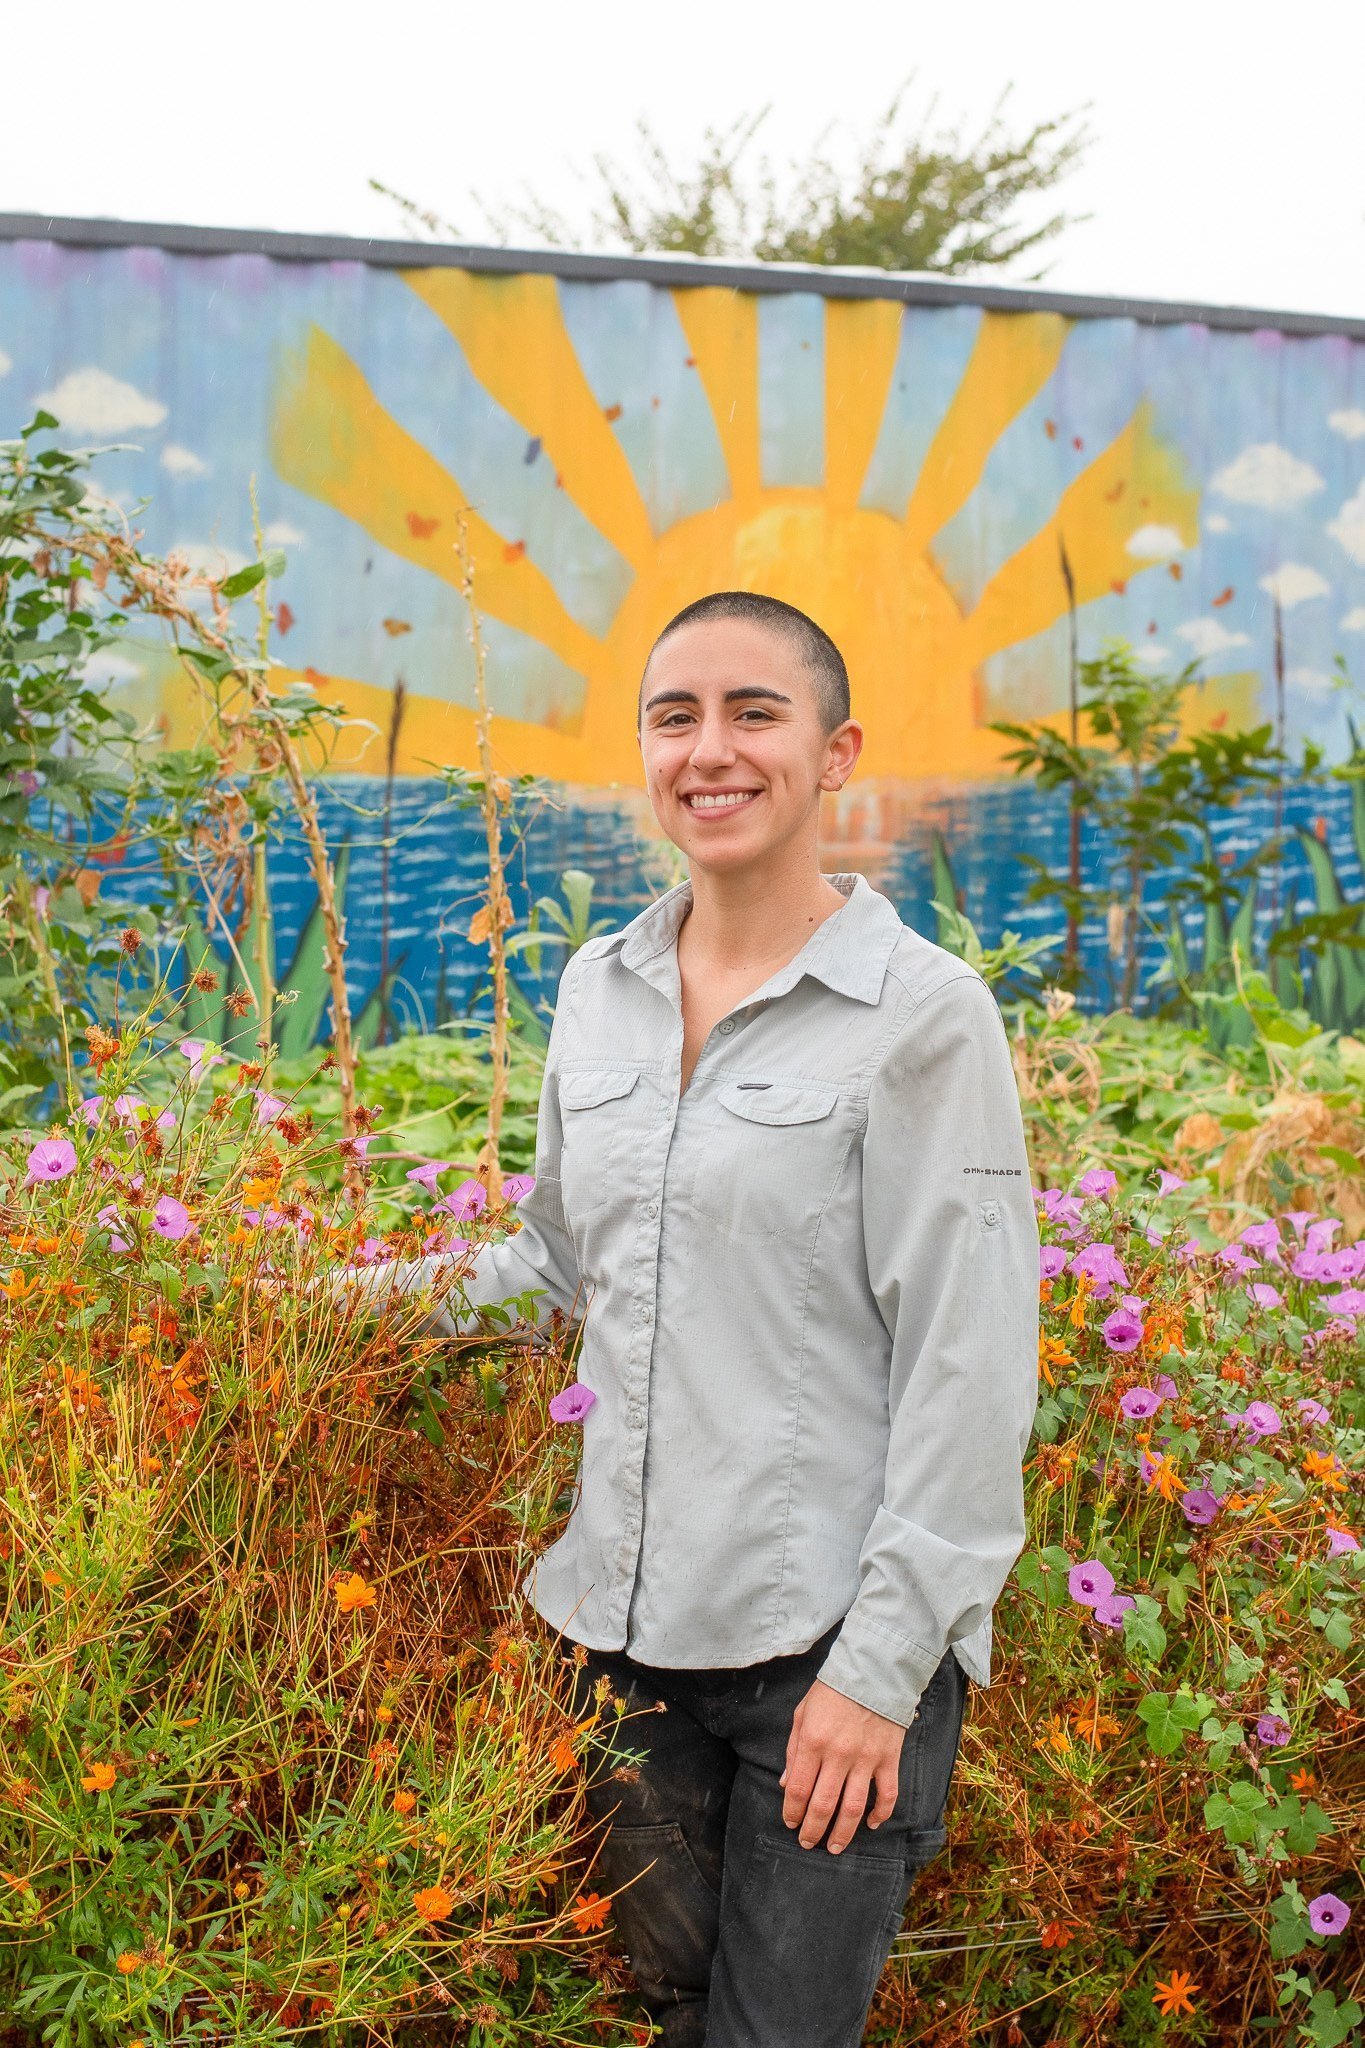   Farmer Anamaria Gutierrez, who has managed the garden for the last three years, poses for a portrait in front of the tool shed Sept. 13. Gutierrez is a first-generation Mexican American who grew up on the border in south Texas. As garden manager, G